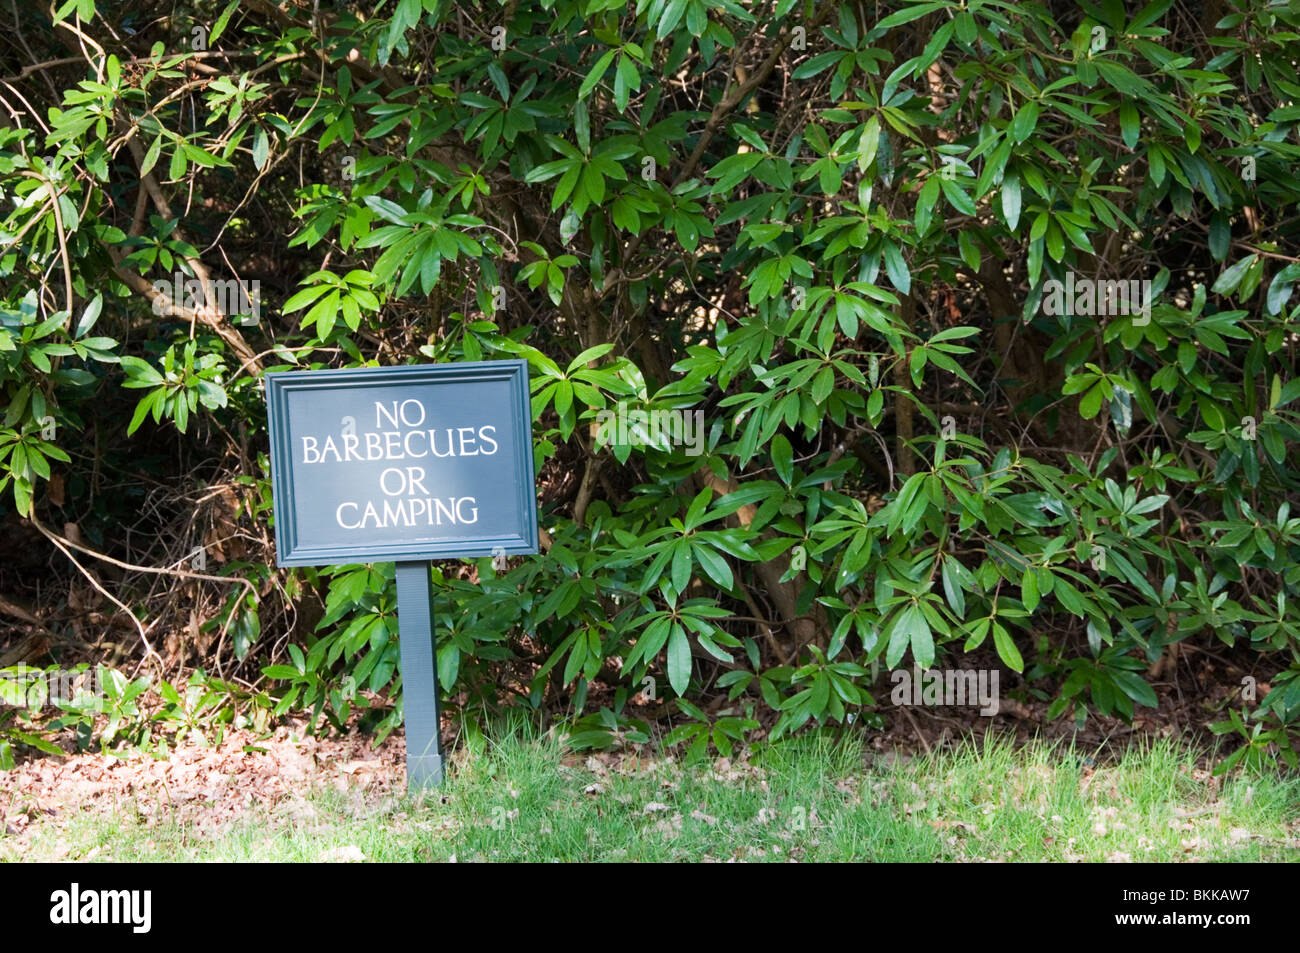 No Barbecues or Camping sign at Sandringham Country Park, Norfolk, England Stock Photo